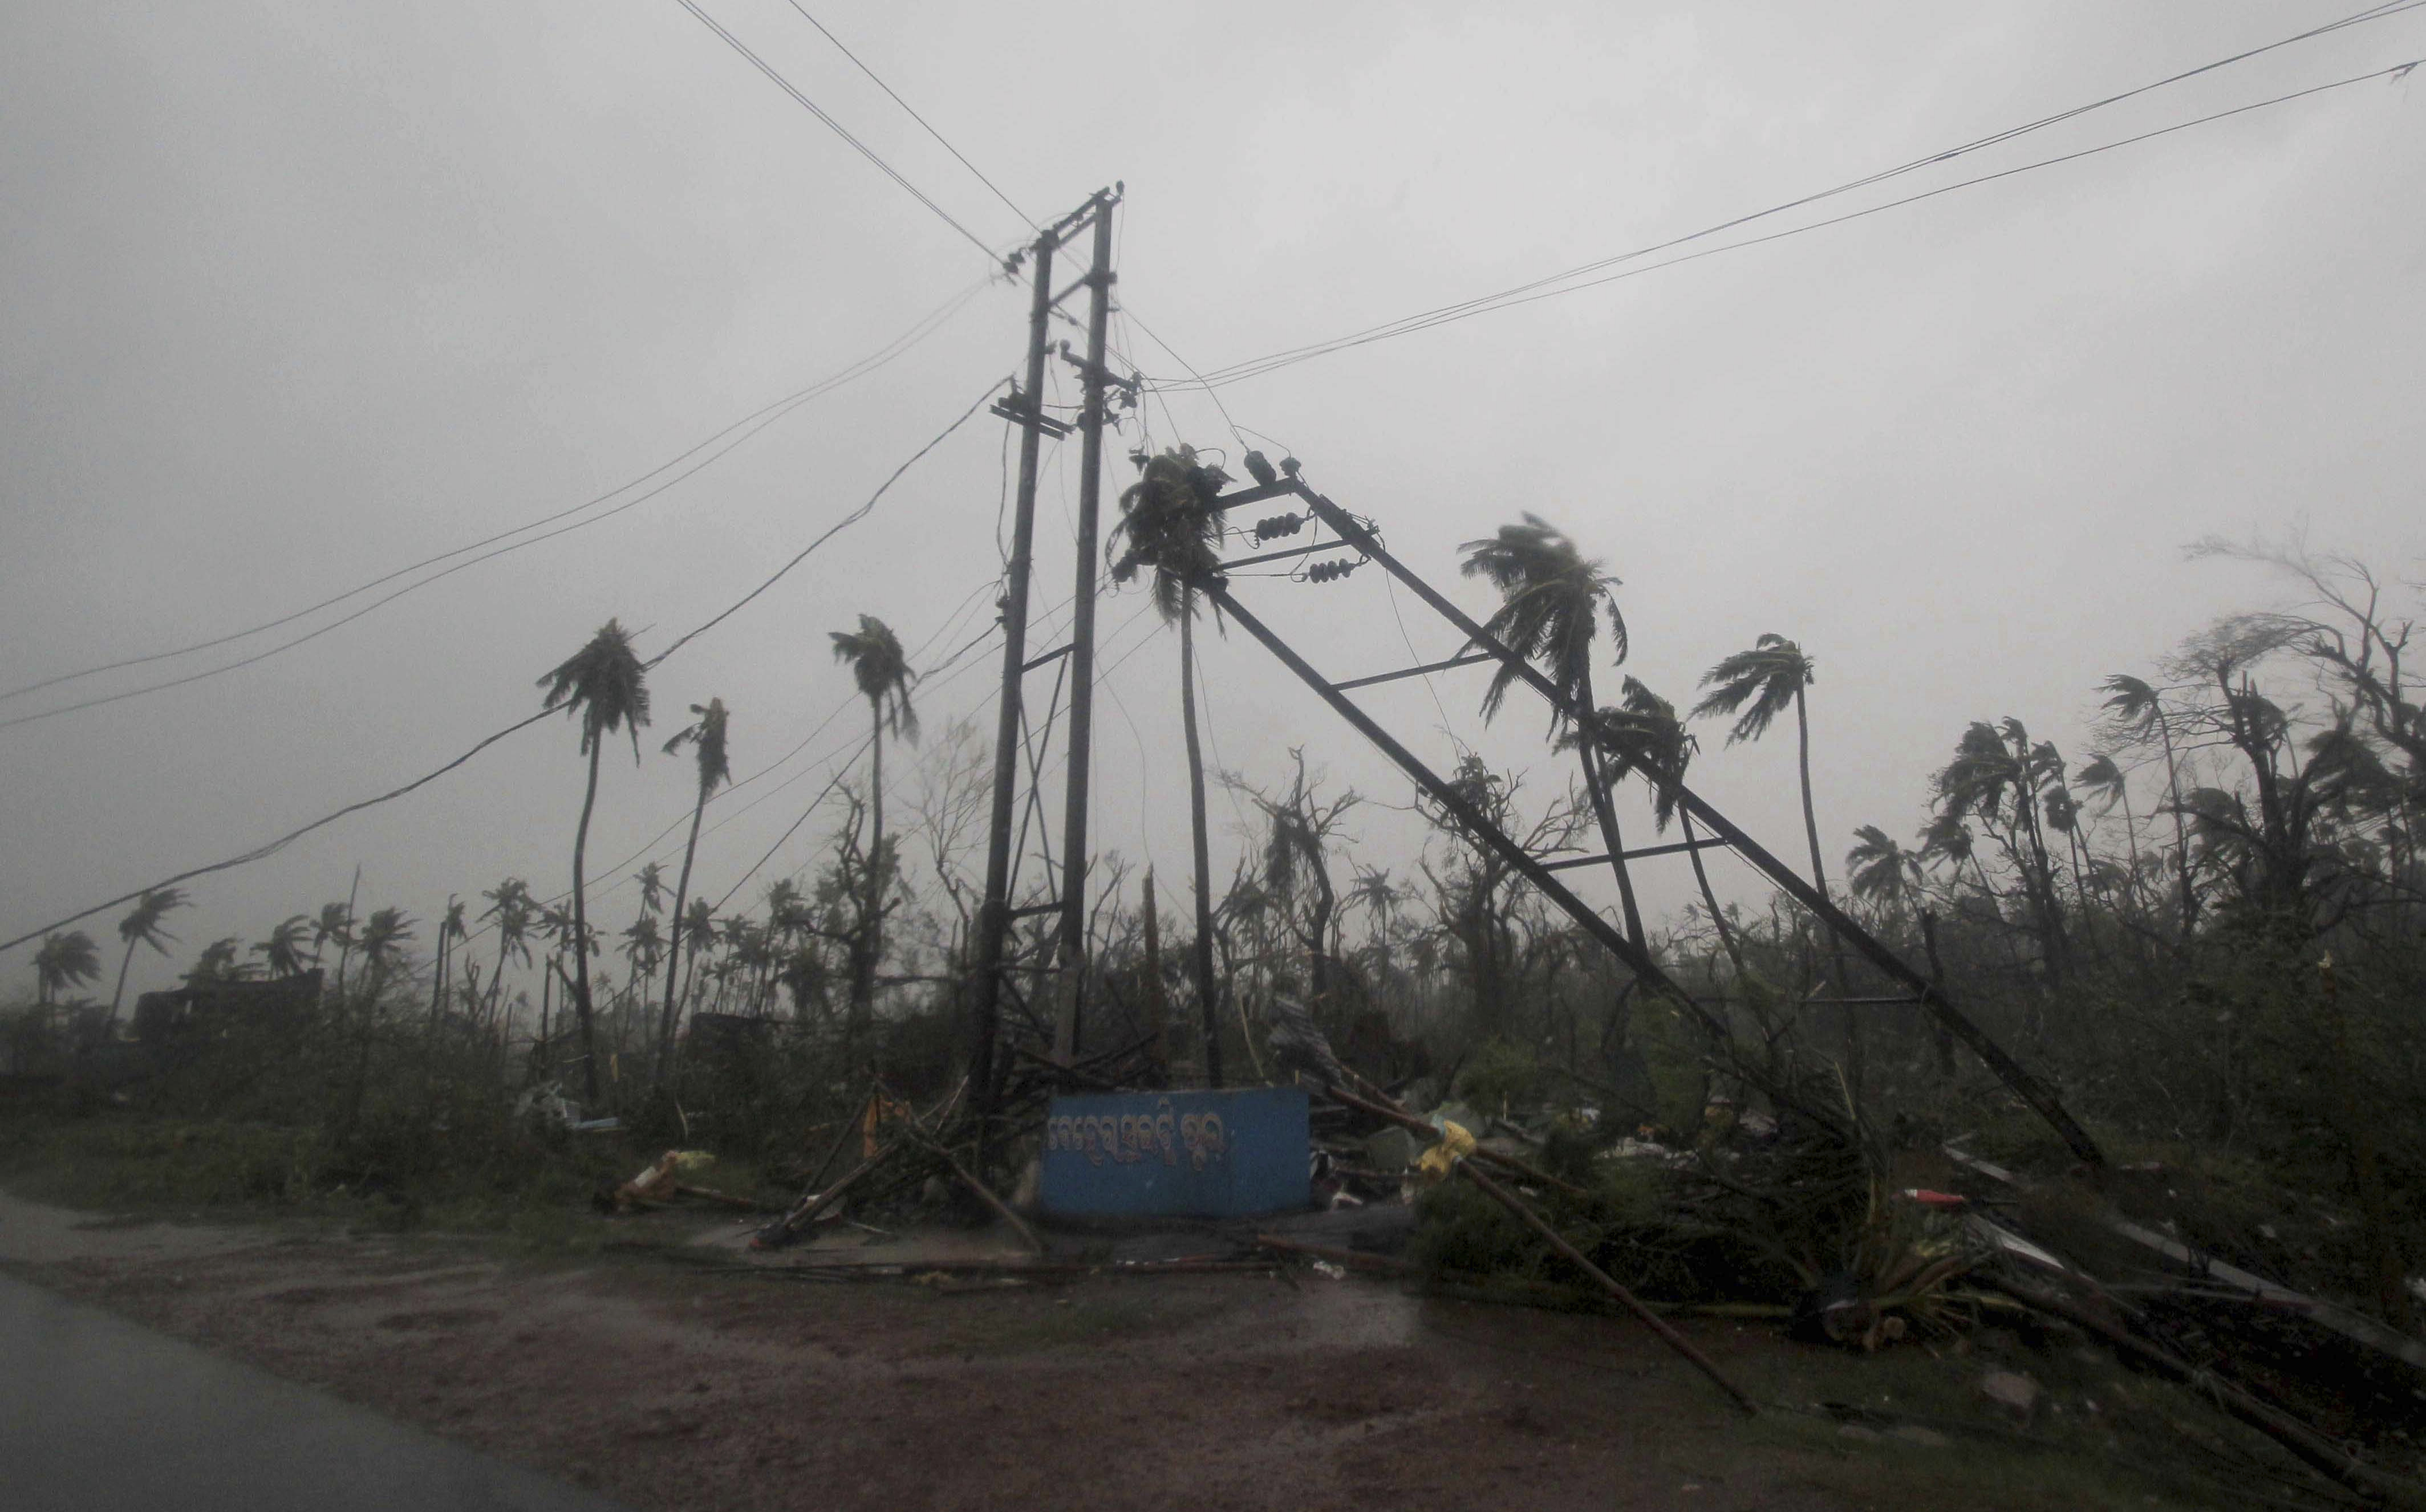 Uprooted tress and damaged electric poles are seen along a road in Puri district after Cyclone Fani hit the coastal eastern state of Odisha, India, Friday, May 3, 2019. Cyclone Fani tore through India's eastern coast on Friday as a grade 5 storm, lashing beaches with rain and winds gusting up to 205 kilometers (127 miles) per hour and affecting weather as far away as Mount Everest as it approached the former imperial capital of Kolkata. (AP Photo)